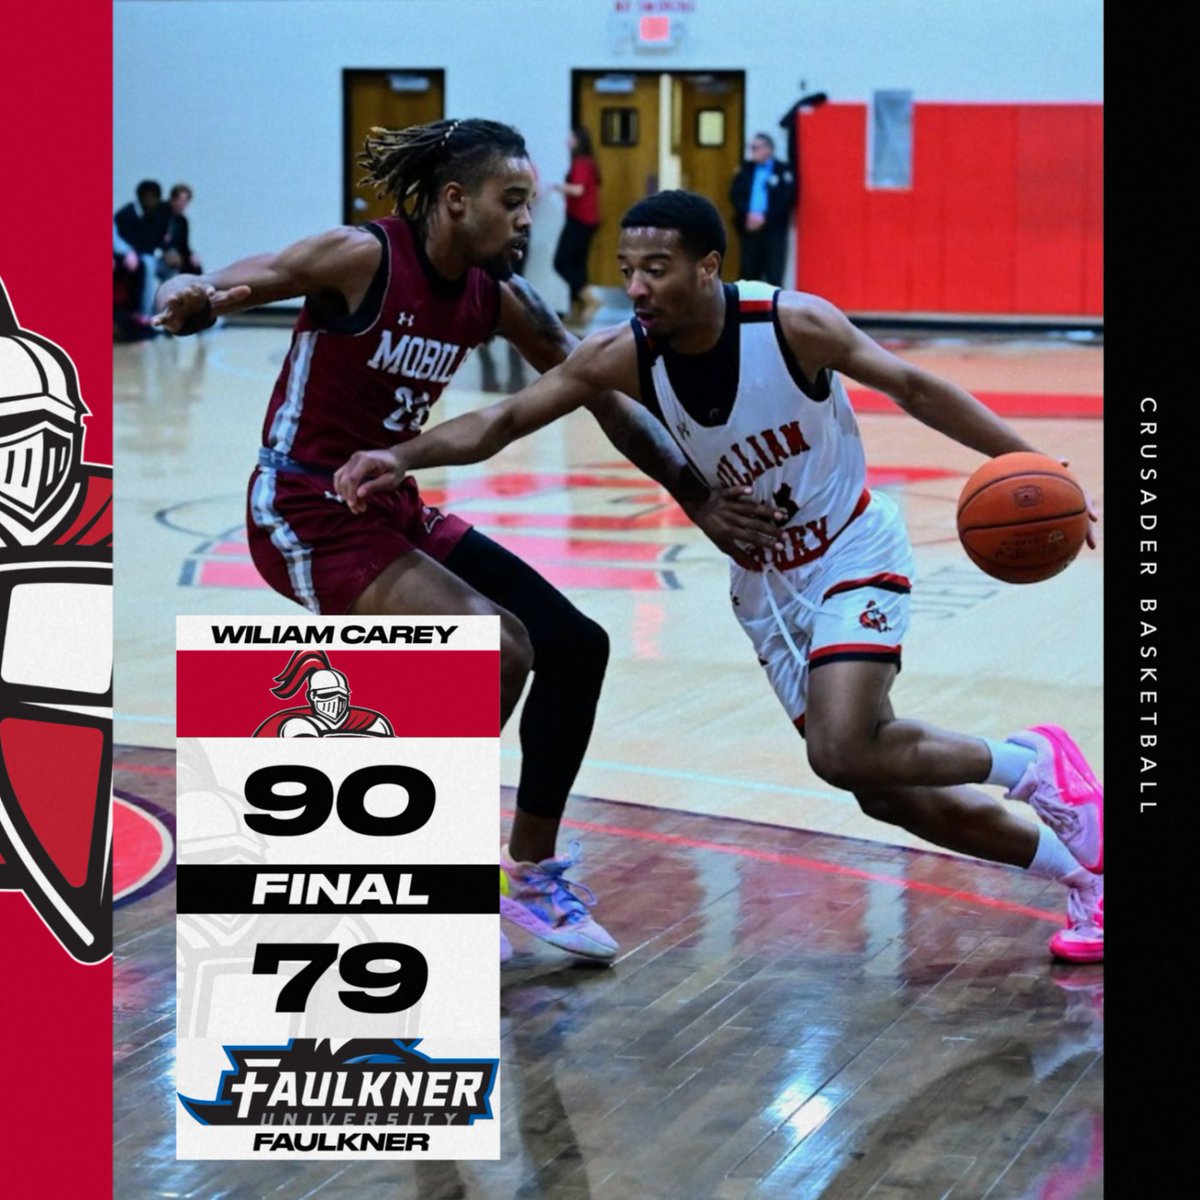 Eagles downed, Crusaders win! Men's Basketball complete the sweep of Faulkner in SSAC action this evening. GO CRUSADERS!